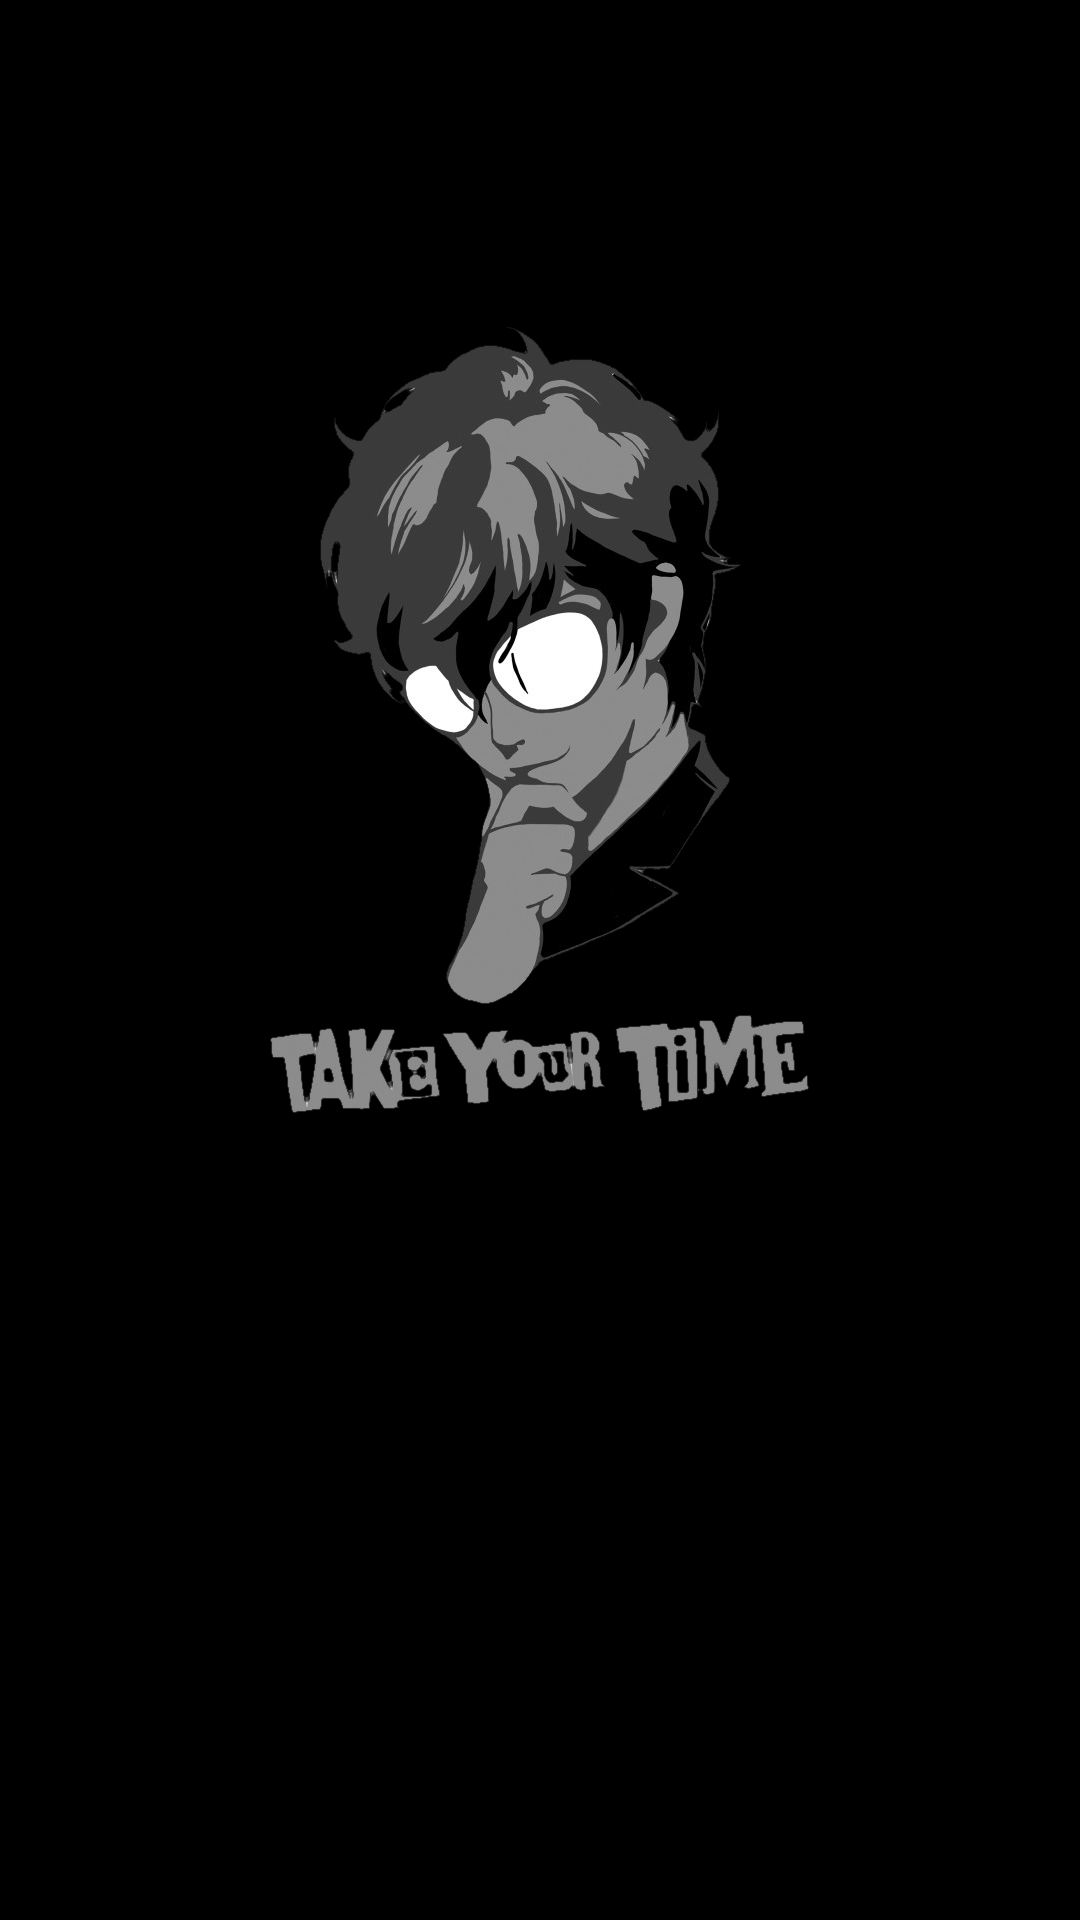 Made a simple wallpaper for amoled devices out of the take your time logo and thought i'd share. [1080x1920]. Persona 5 anime, Persona Persona 5 joker